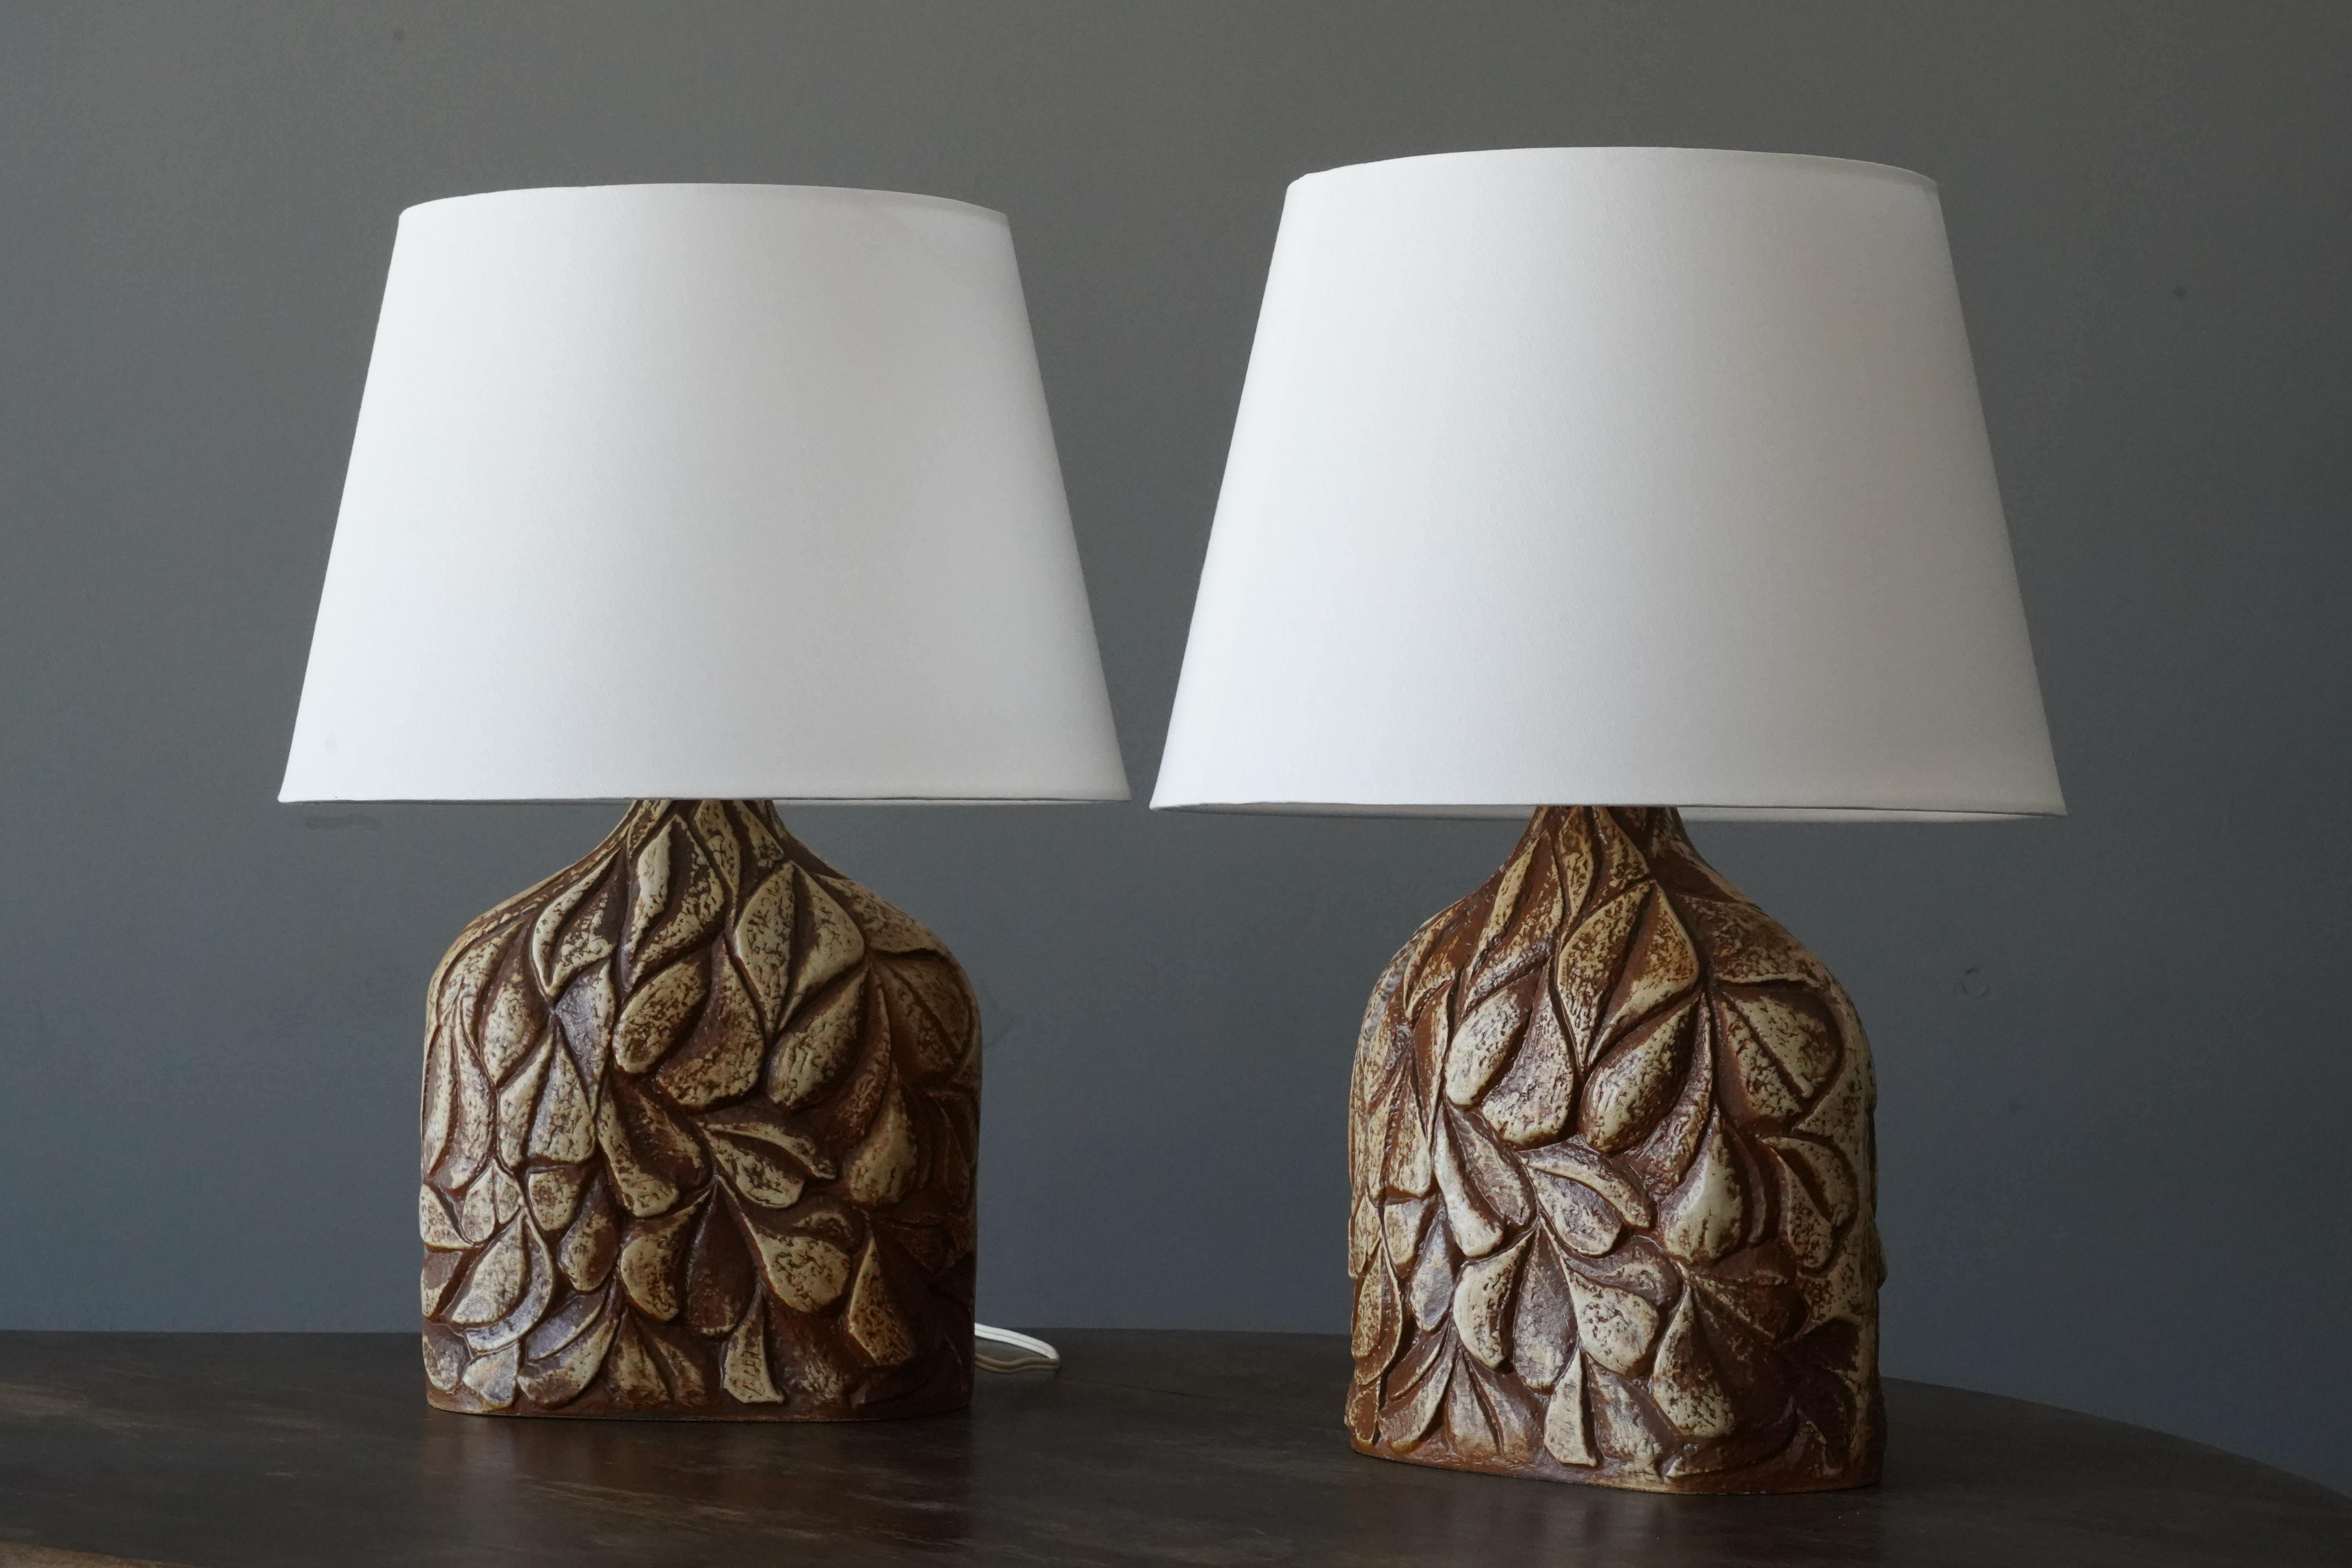 A pair of large table lamps produced by Søholm Keramik, located on the island of Bornholm in Denmark. Features a highly artistic decor. 

Sold without lampshade. Stated dimensions exclude the lampshade.

Glaze features brown-beige colors.

Other